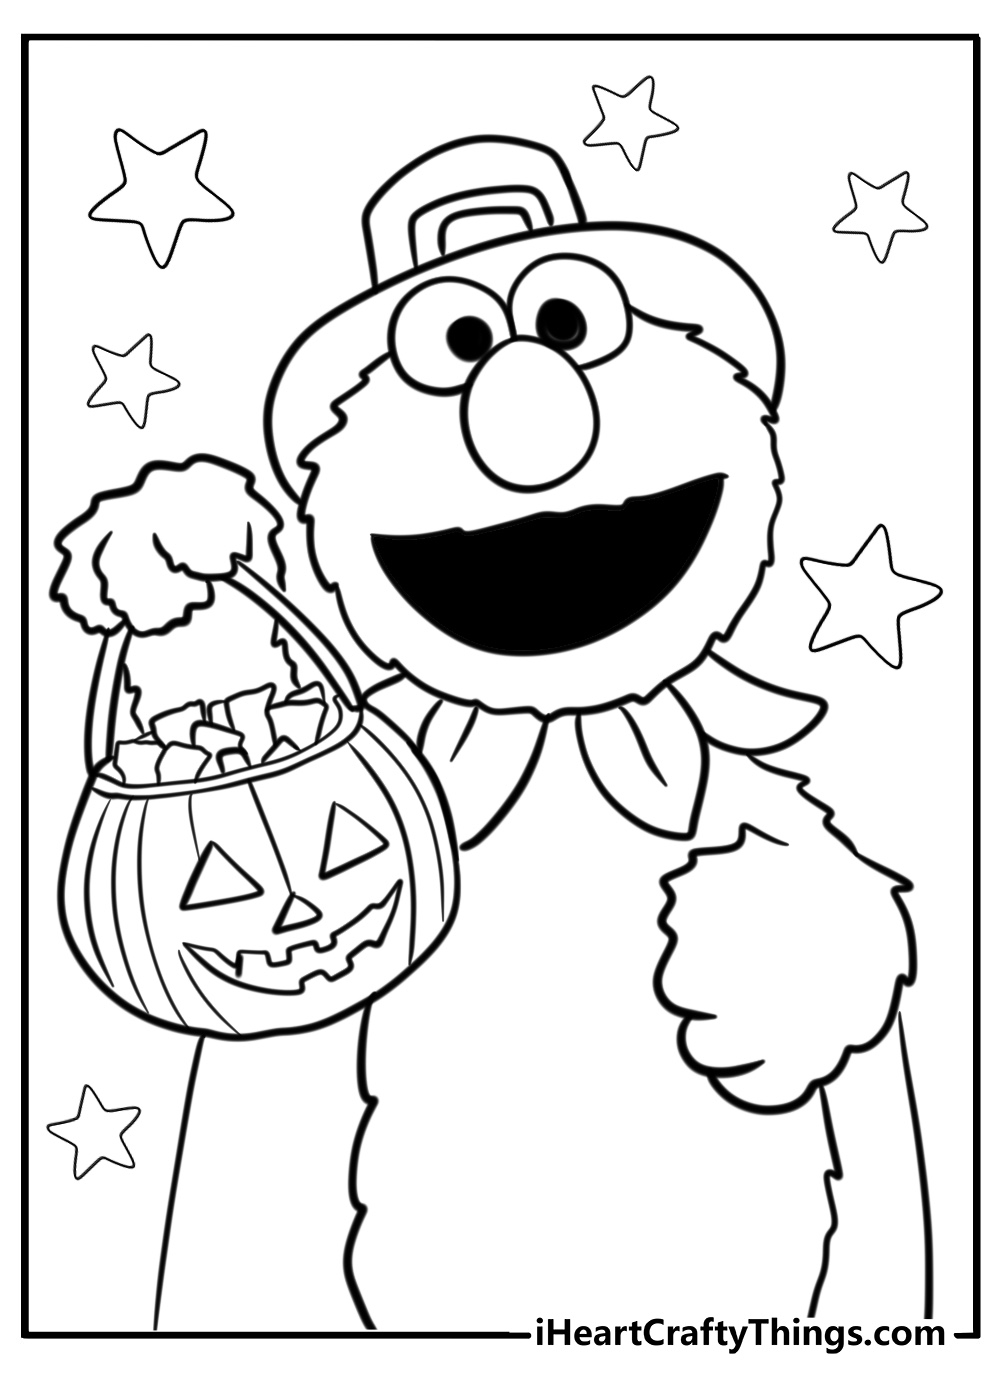 Coloring page of halloween themed elmo